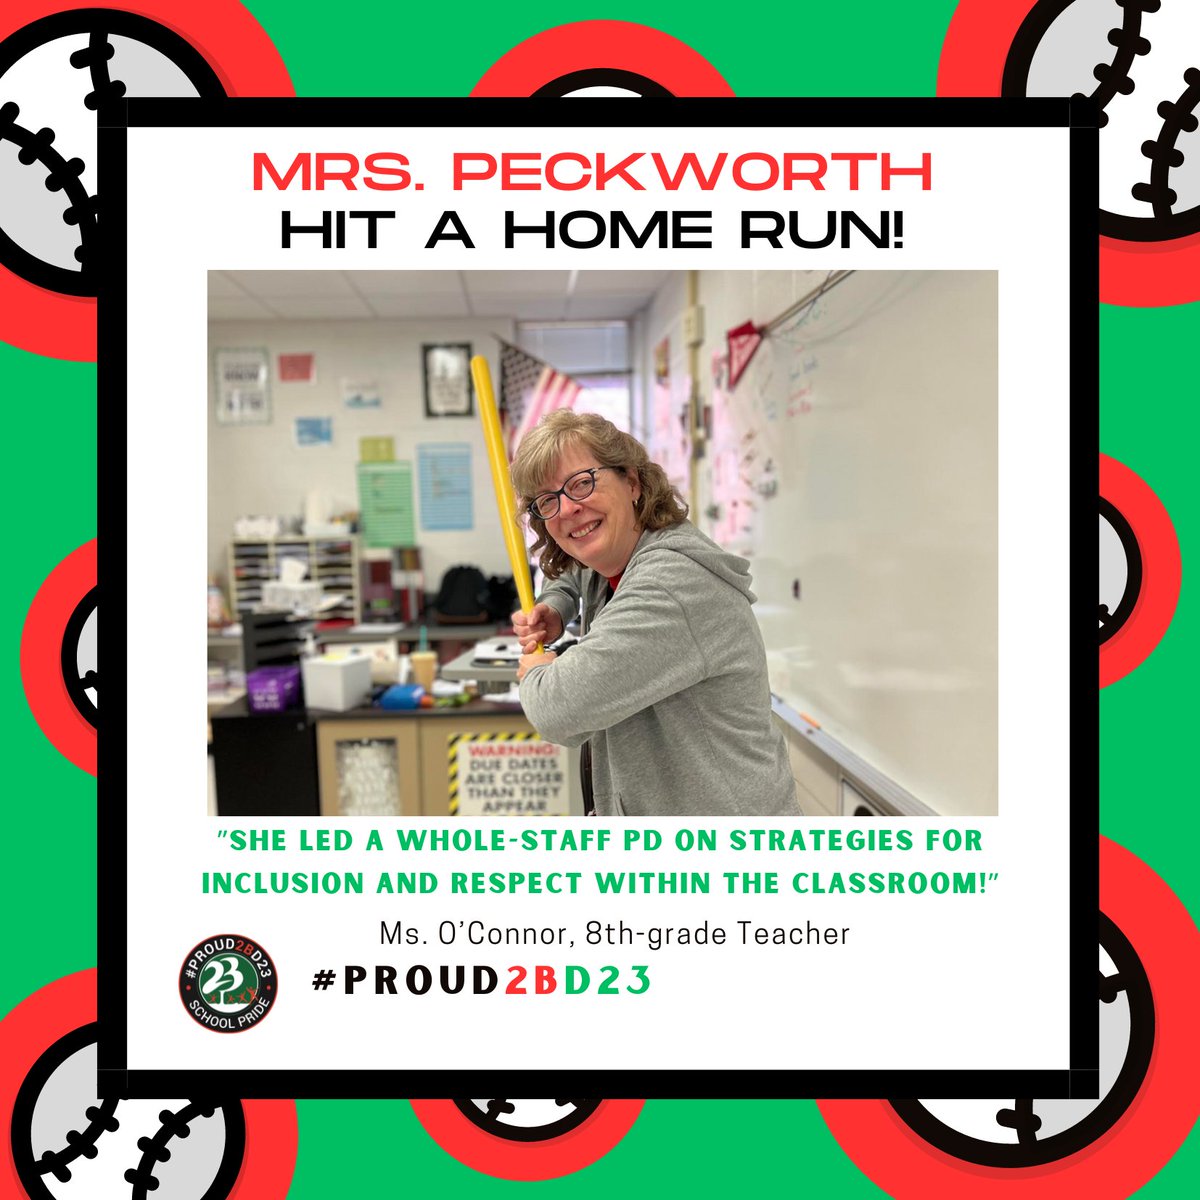 Batter up! The @PHSD23 staff are hitting home runs for our students, families, and colleagues! Which staff member will round the bases next? Stay tuned! #PROUD2BD23! ⚾️ @Dangelaccio @CraigCurtisD23 @AmyMcP_BAMMP @D23Eisenhower @D23Ross @D23Sullivan @D23MacArthur